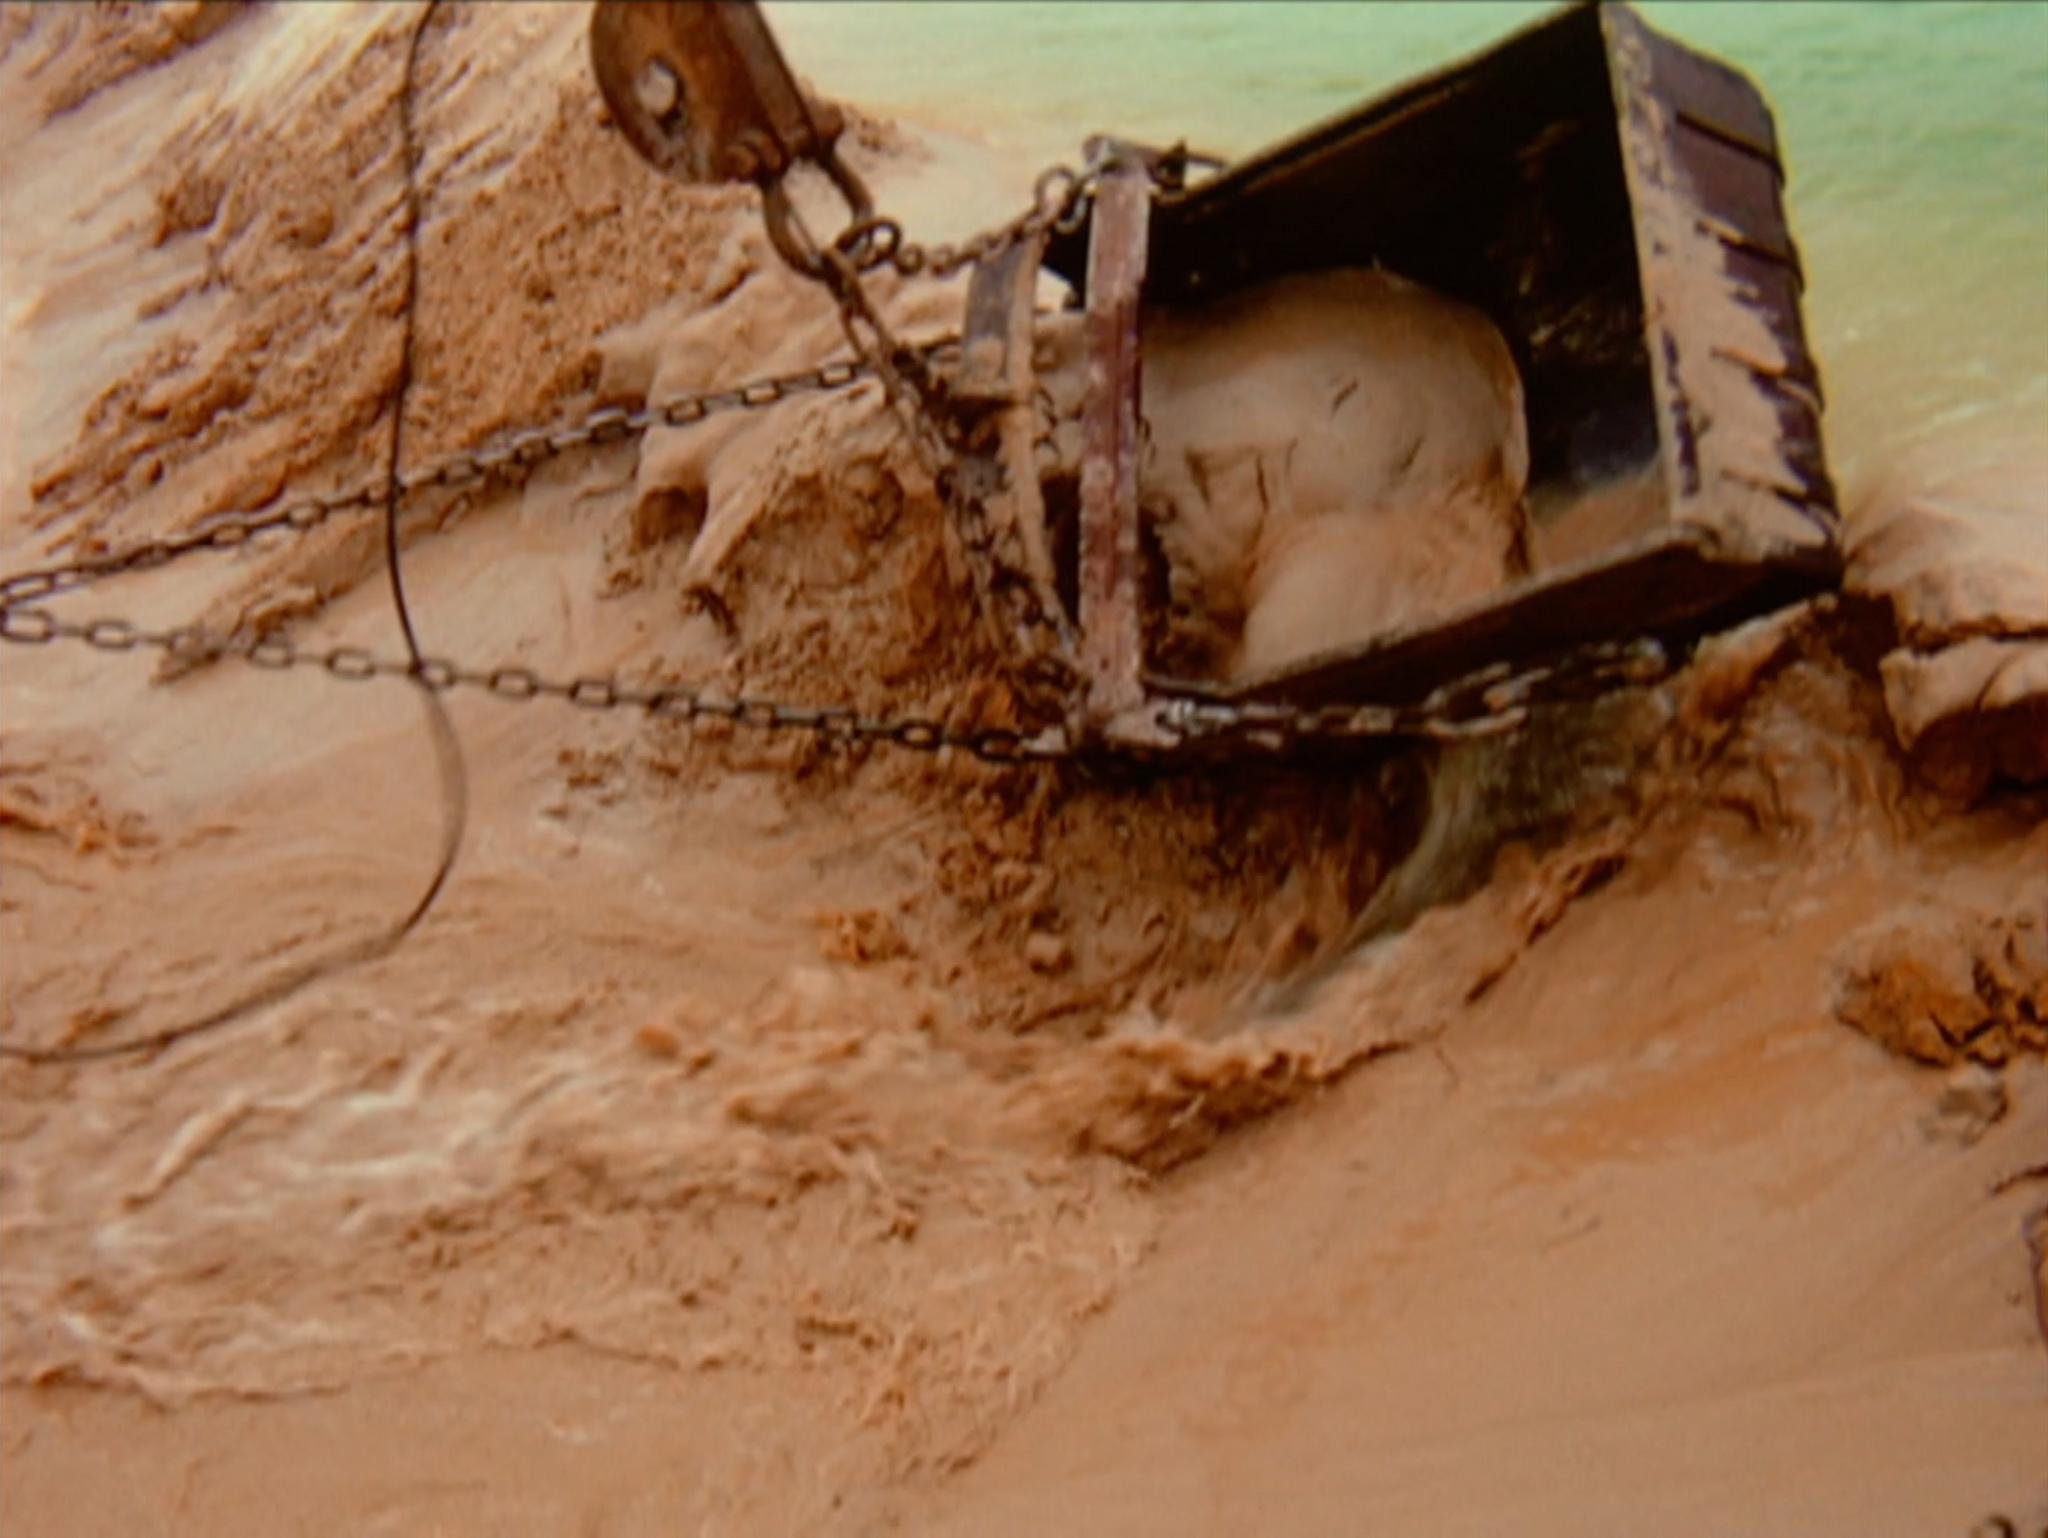 a dragline scooping up earth and water rushes in behind